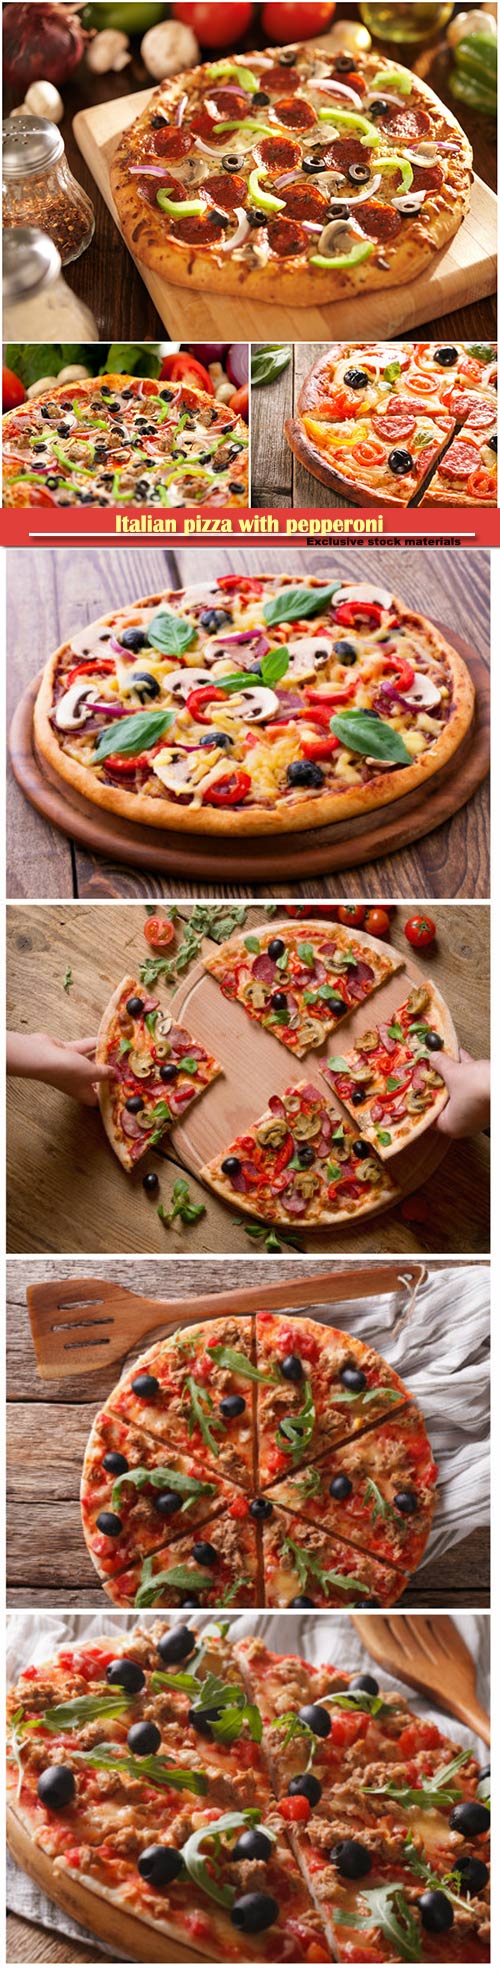 Italian pizza with pepperoni and toppings, pizza with seafood